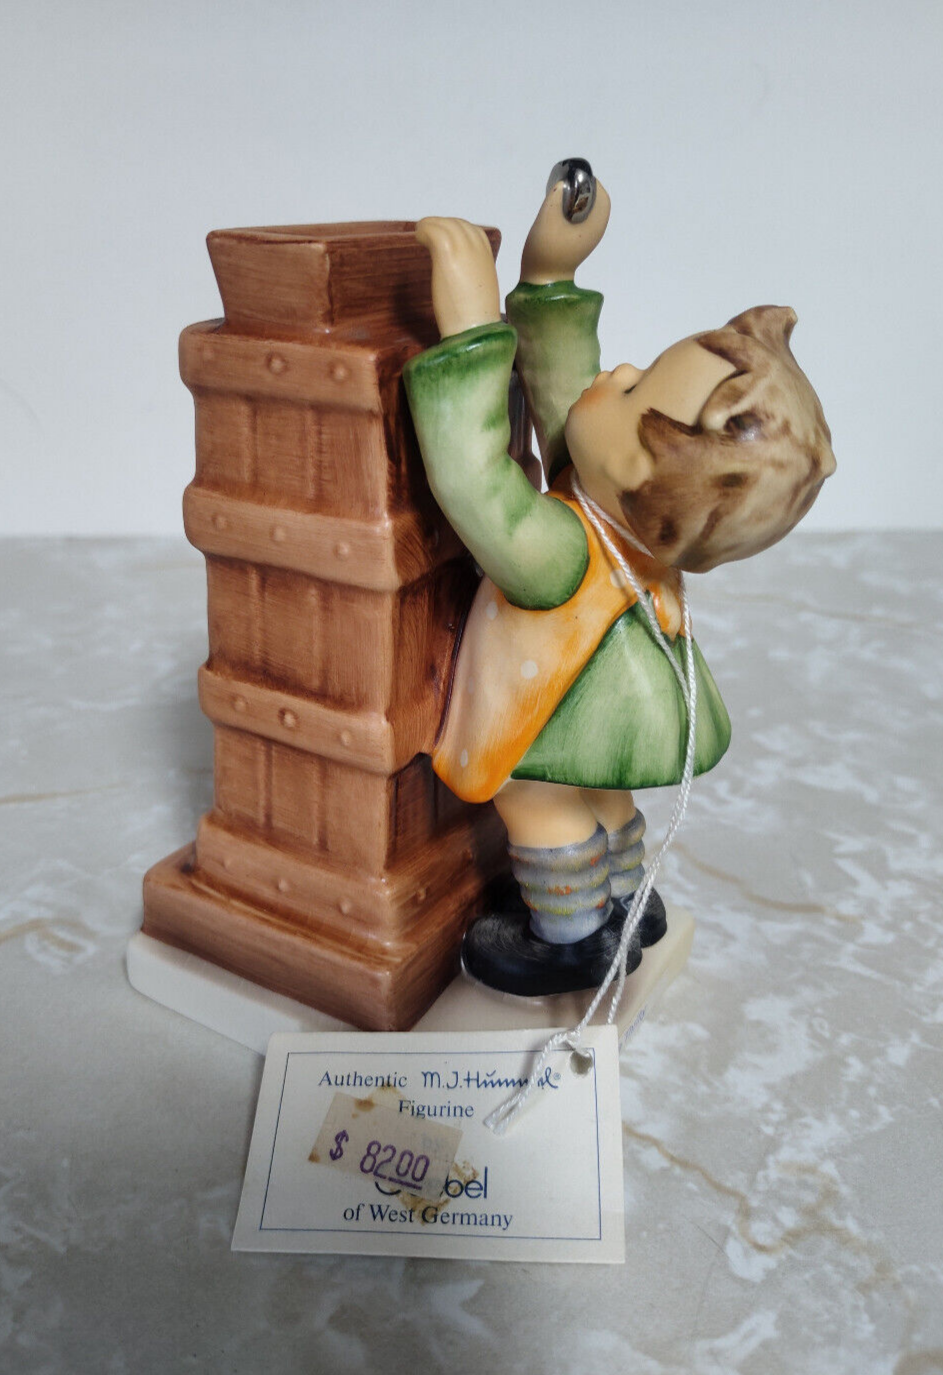 ::Little Thrifty Bank Hummel Figurine 118 TMK6 5 Inches W Germany 1979 to 1990